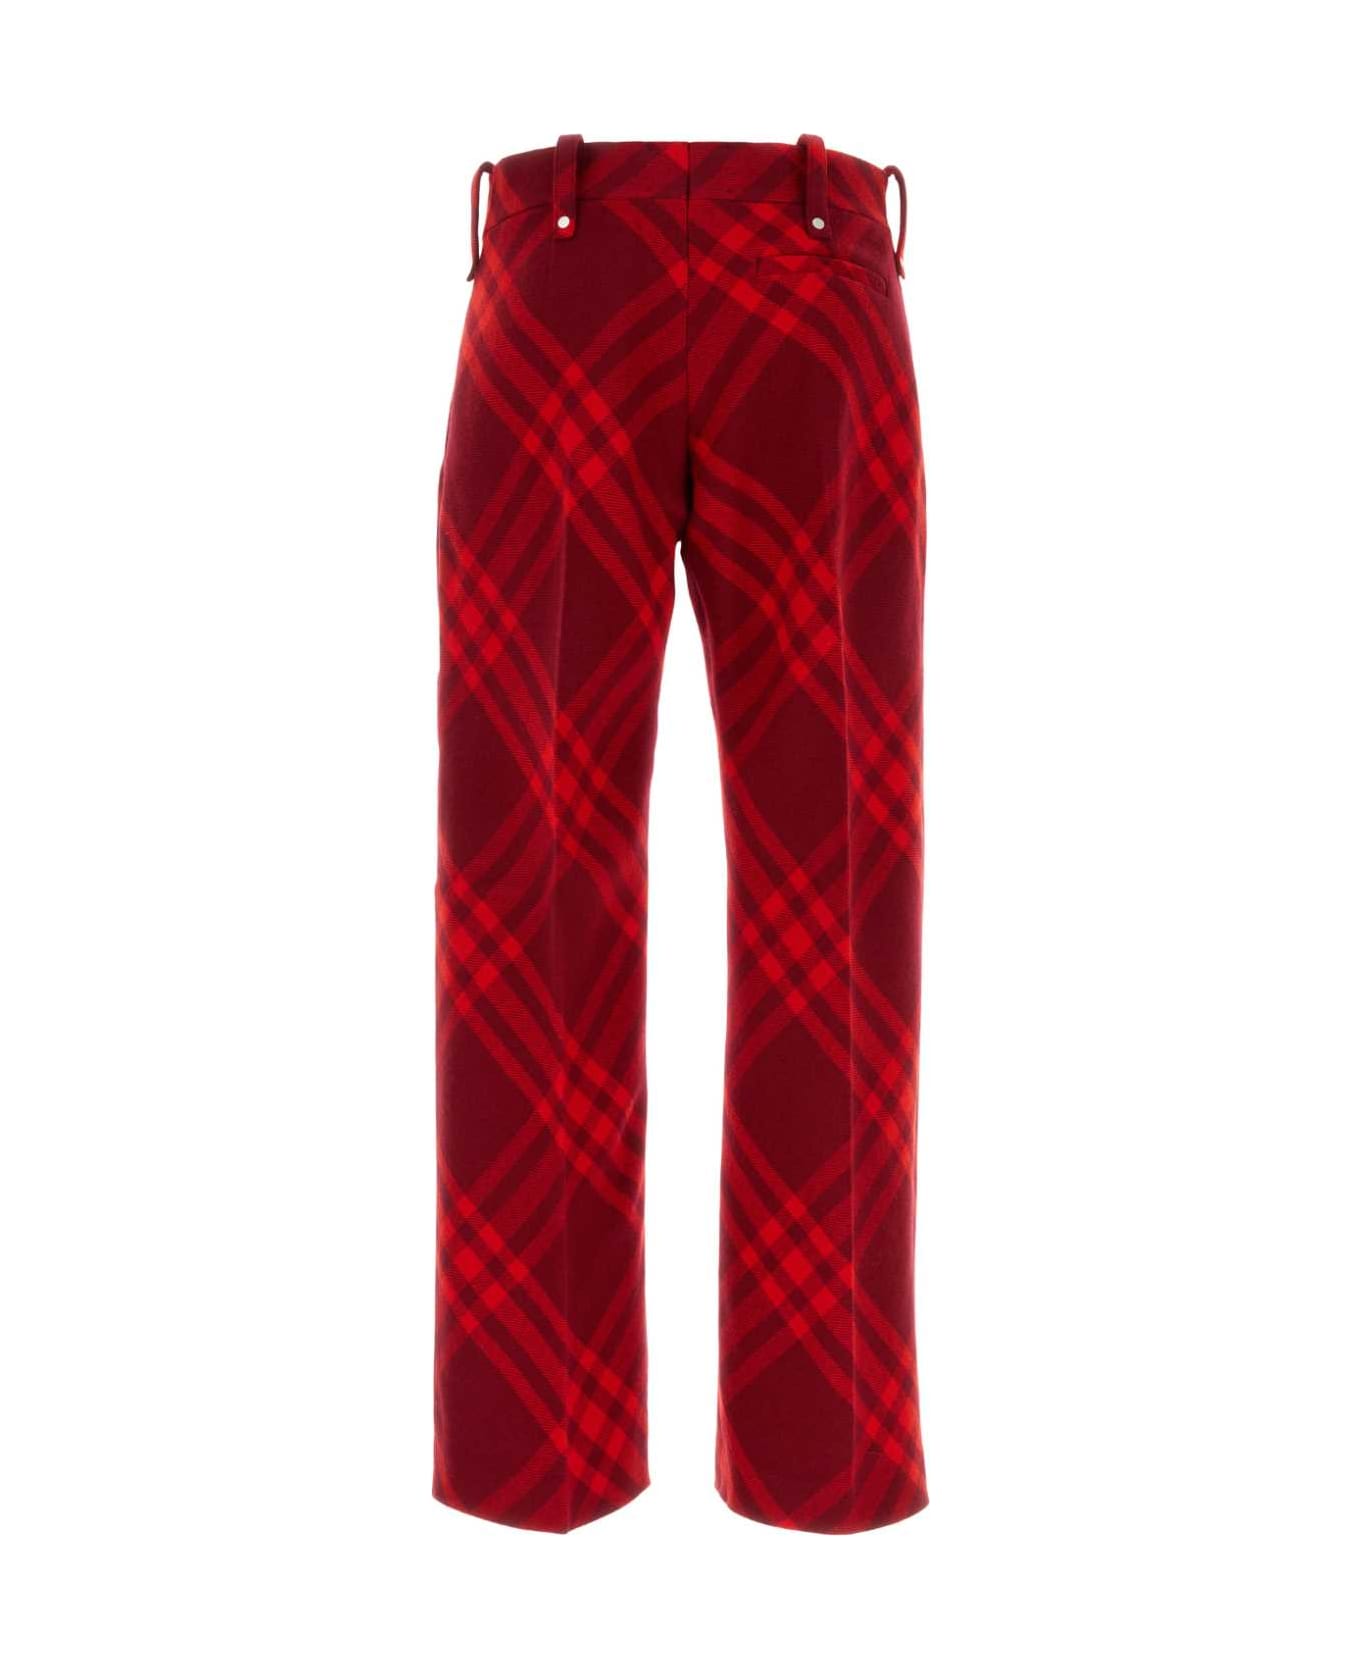 Burberry Embroidered Wool Pant - RIPPLE